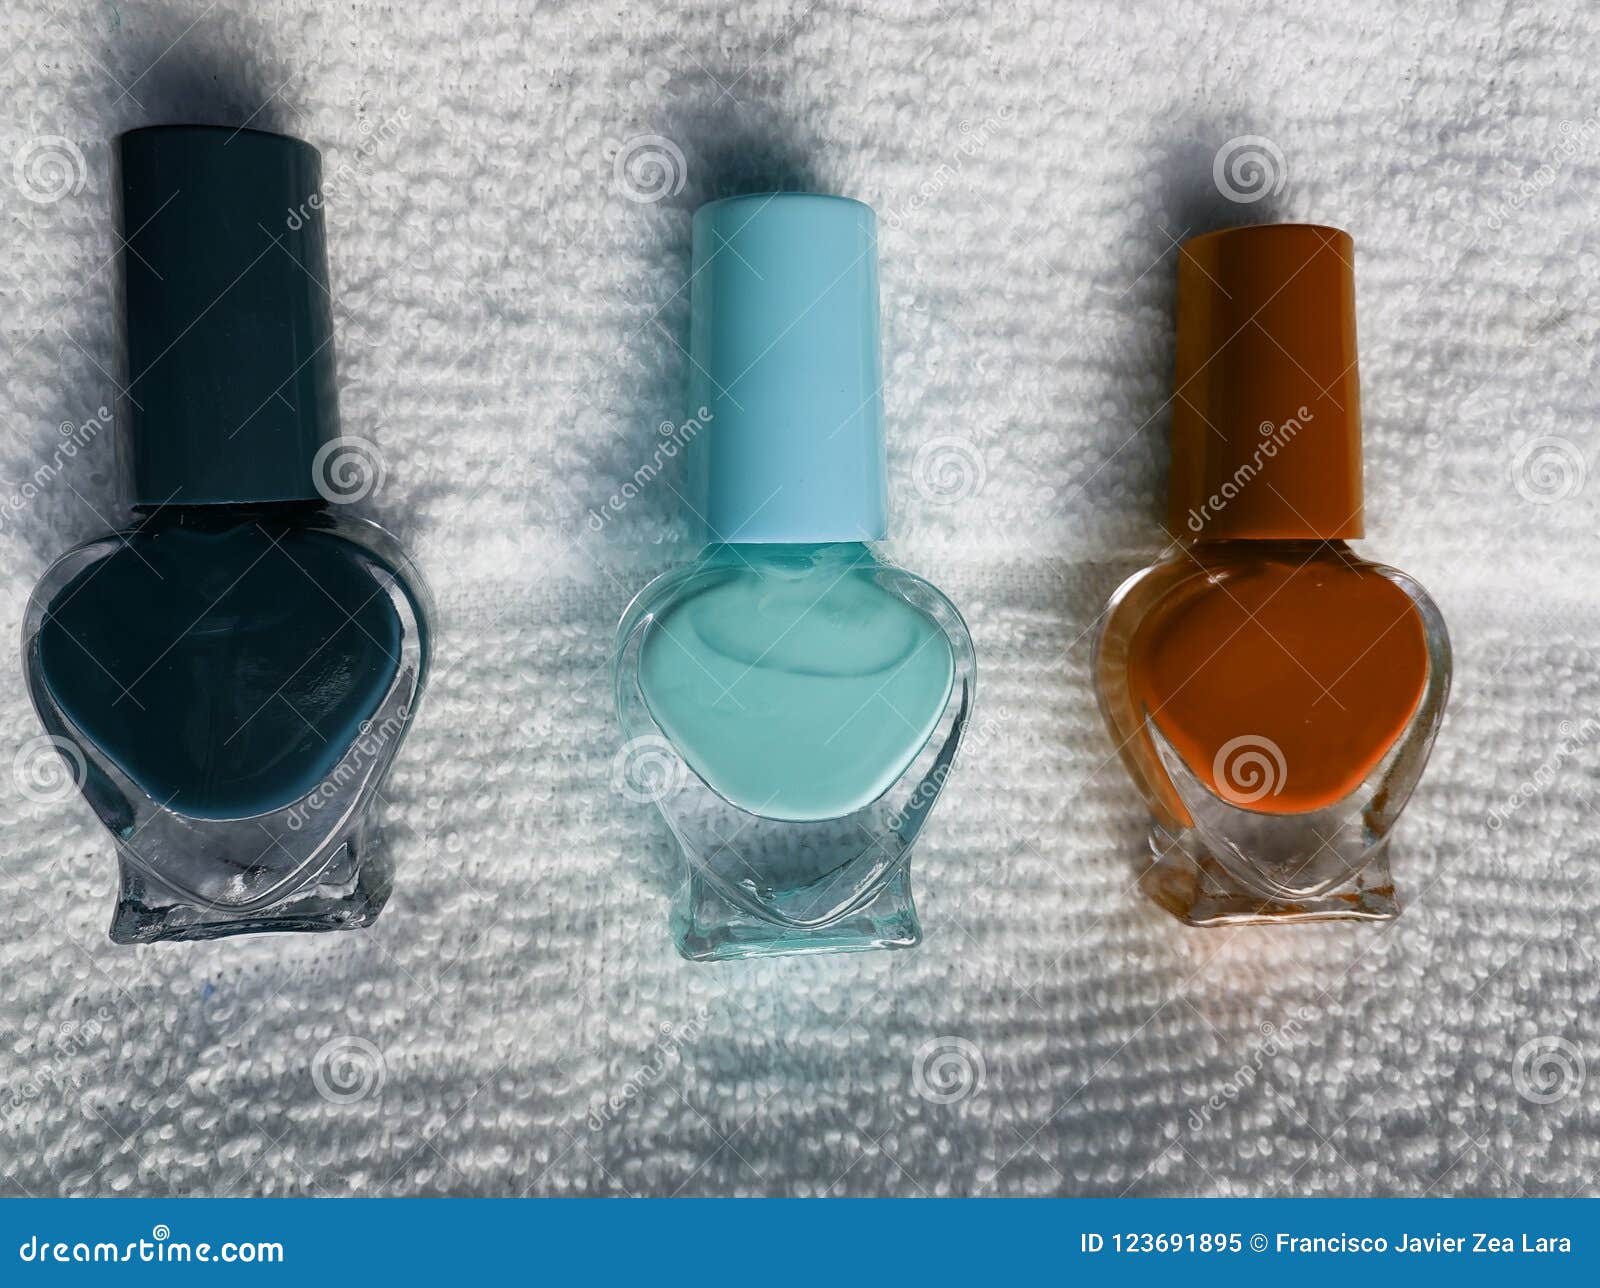 bottles with nail polish in dark blue, light blue and orange, with white background towel